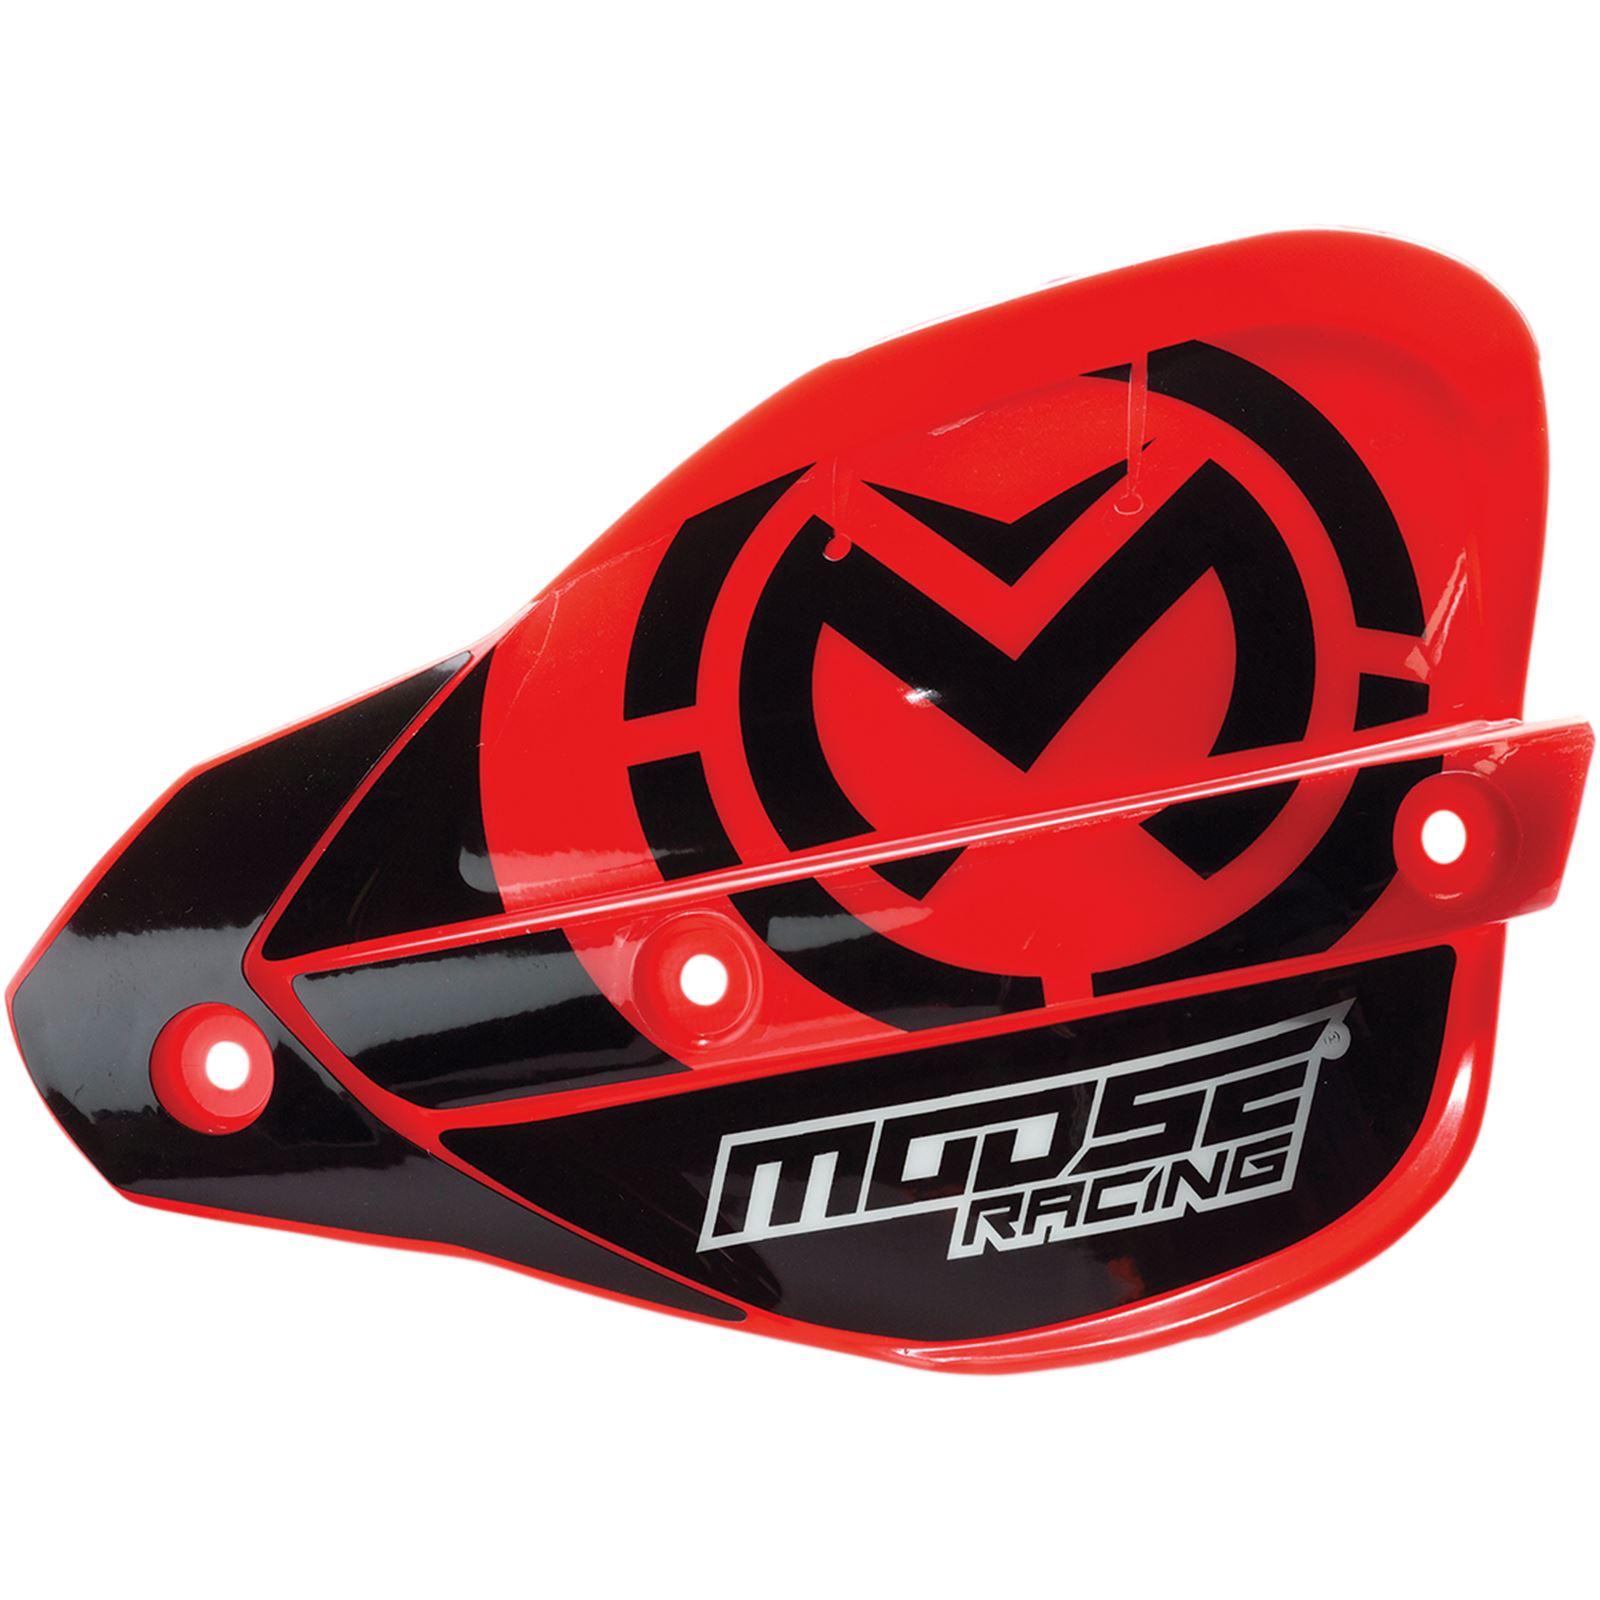 Moose Racing Red Replacement Enduro Handshields